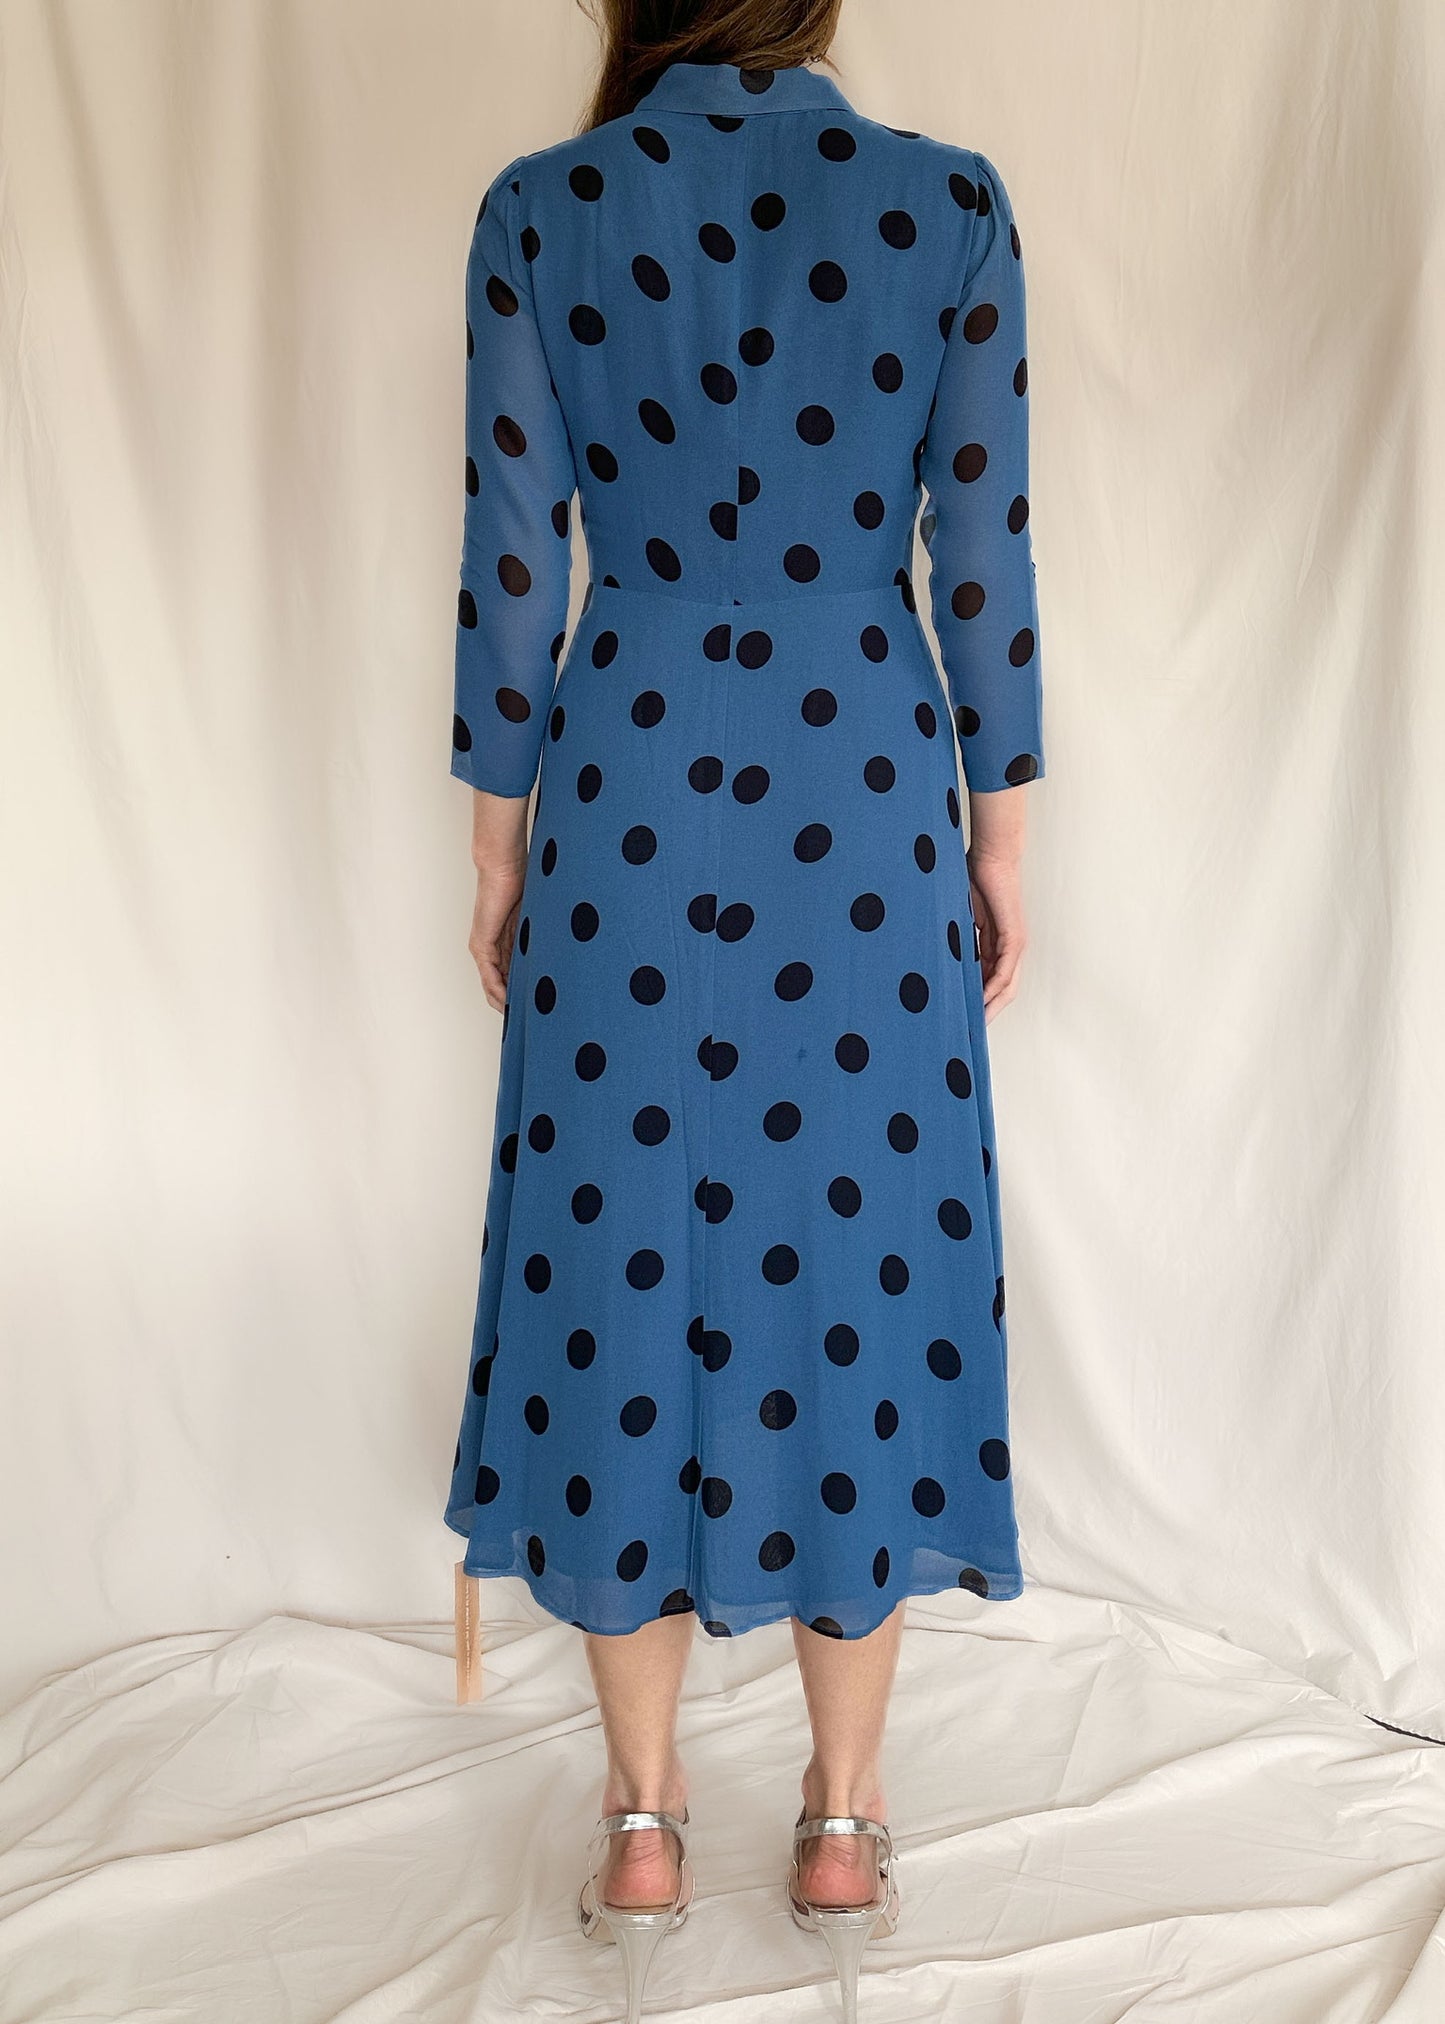 Brand New Reformation “Arcadia” Blue Dotted Shirt Dress Size 8